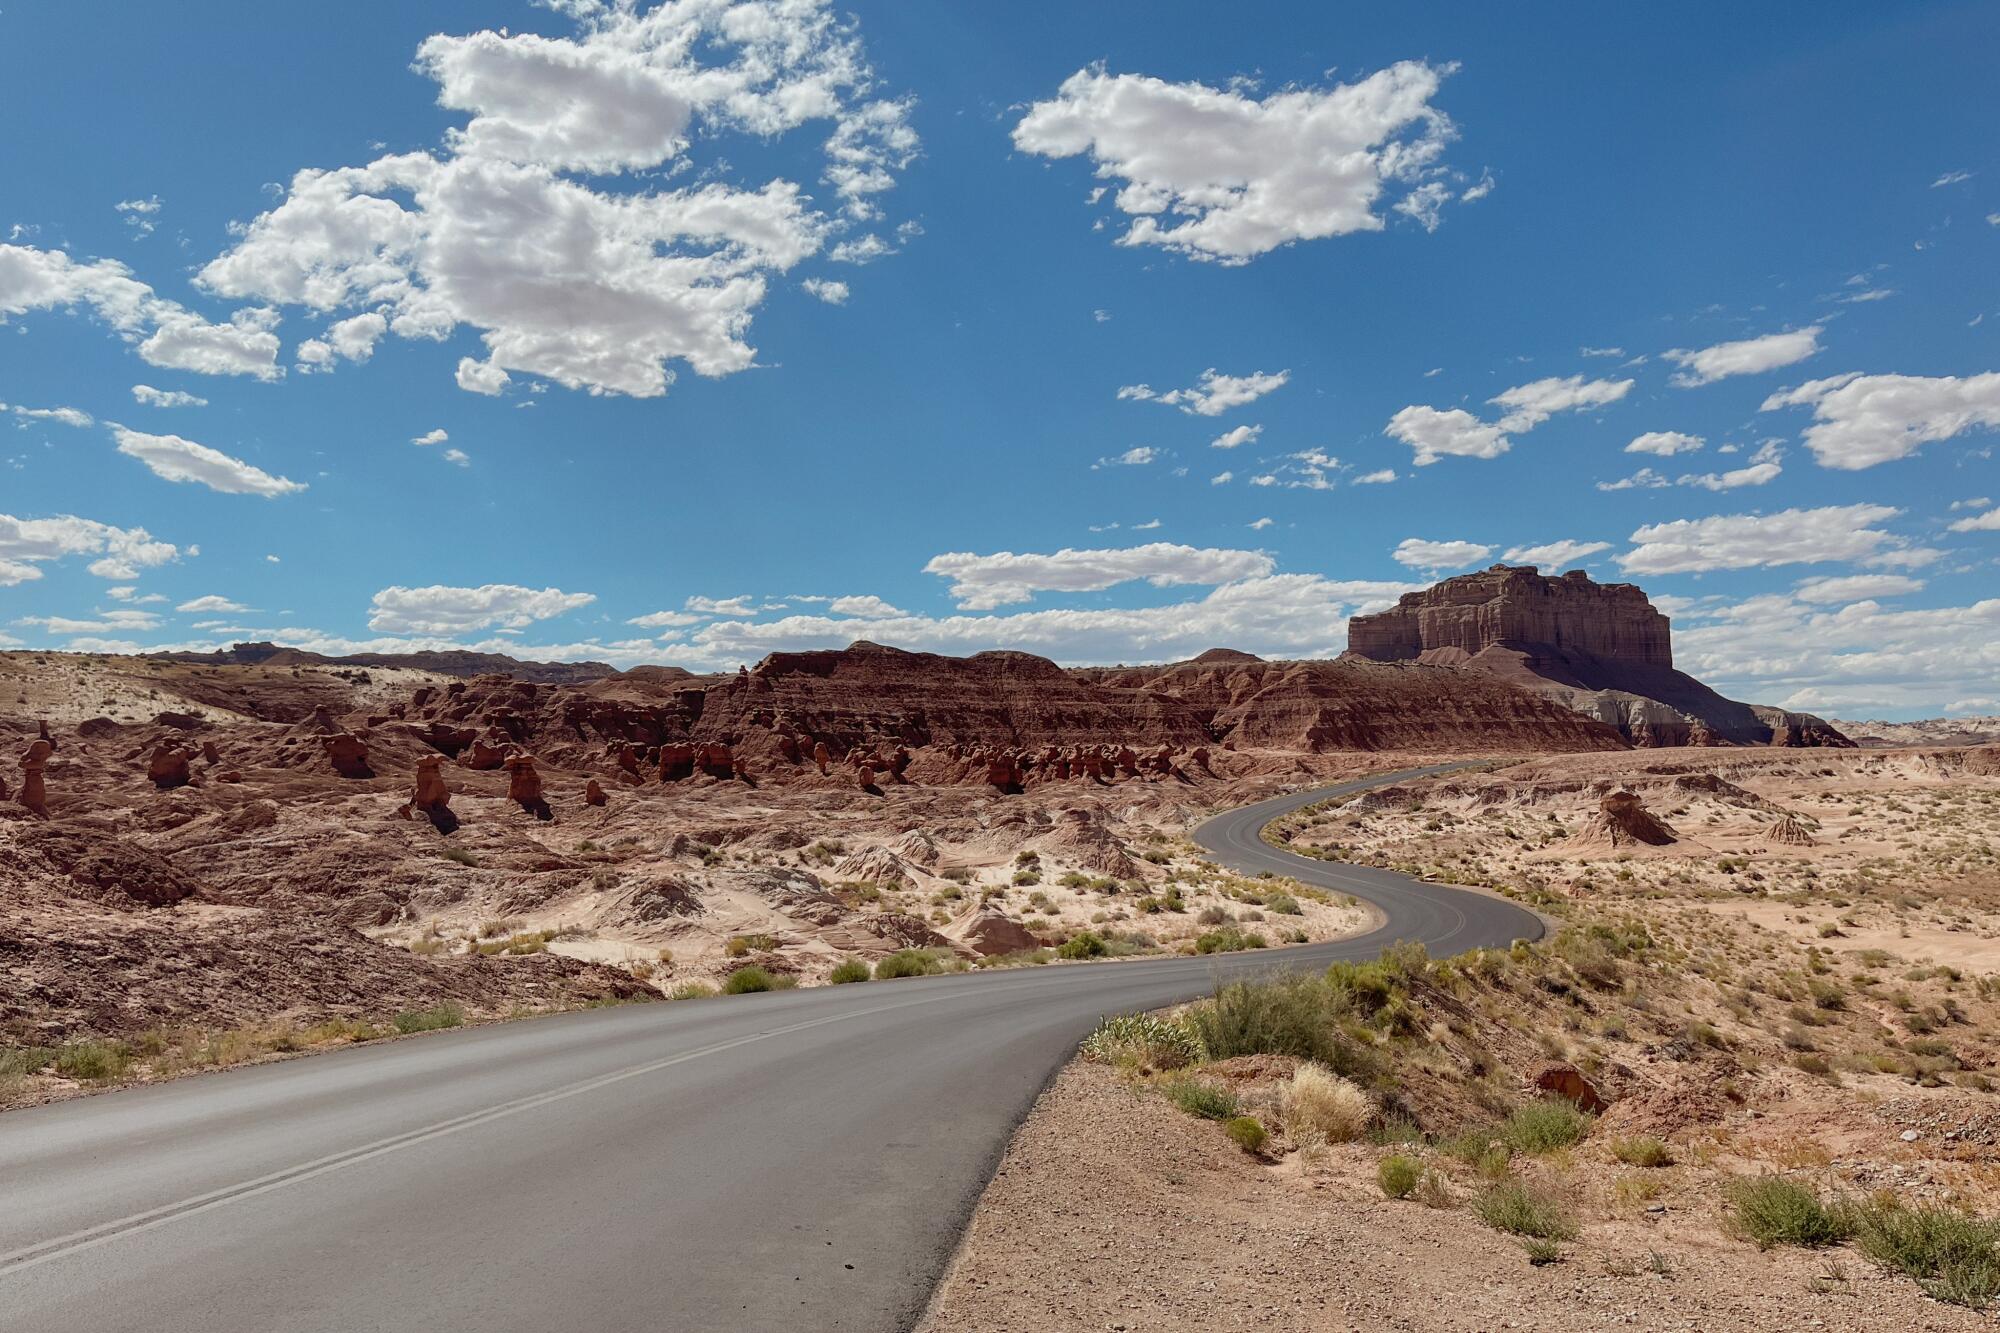 Can you spot the goblins along Goblin Valley Road in Goblin Valley State Park?